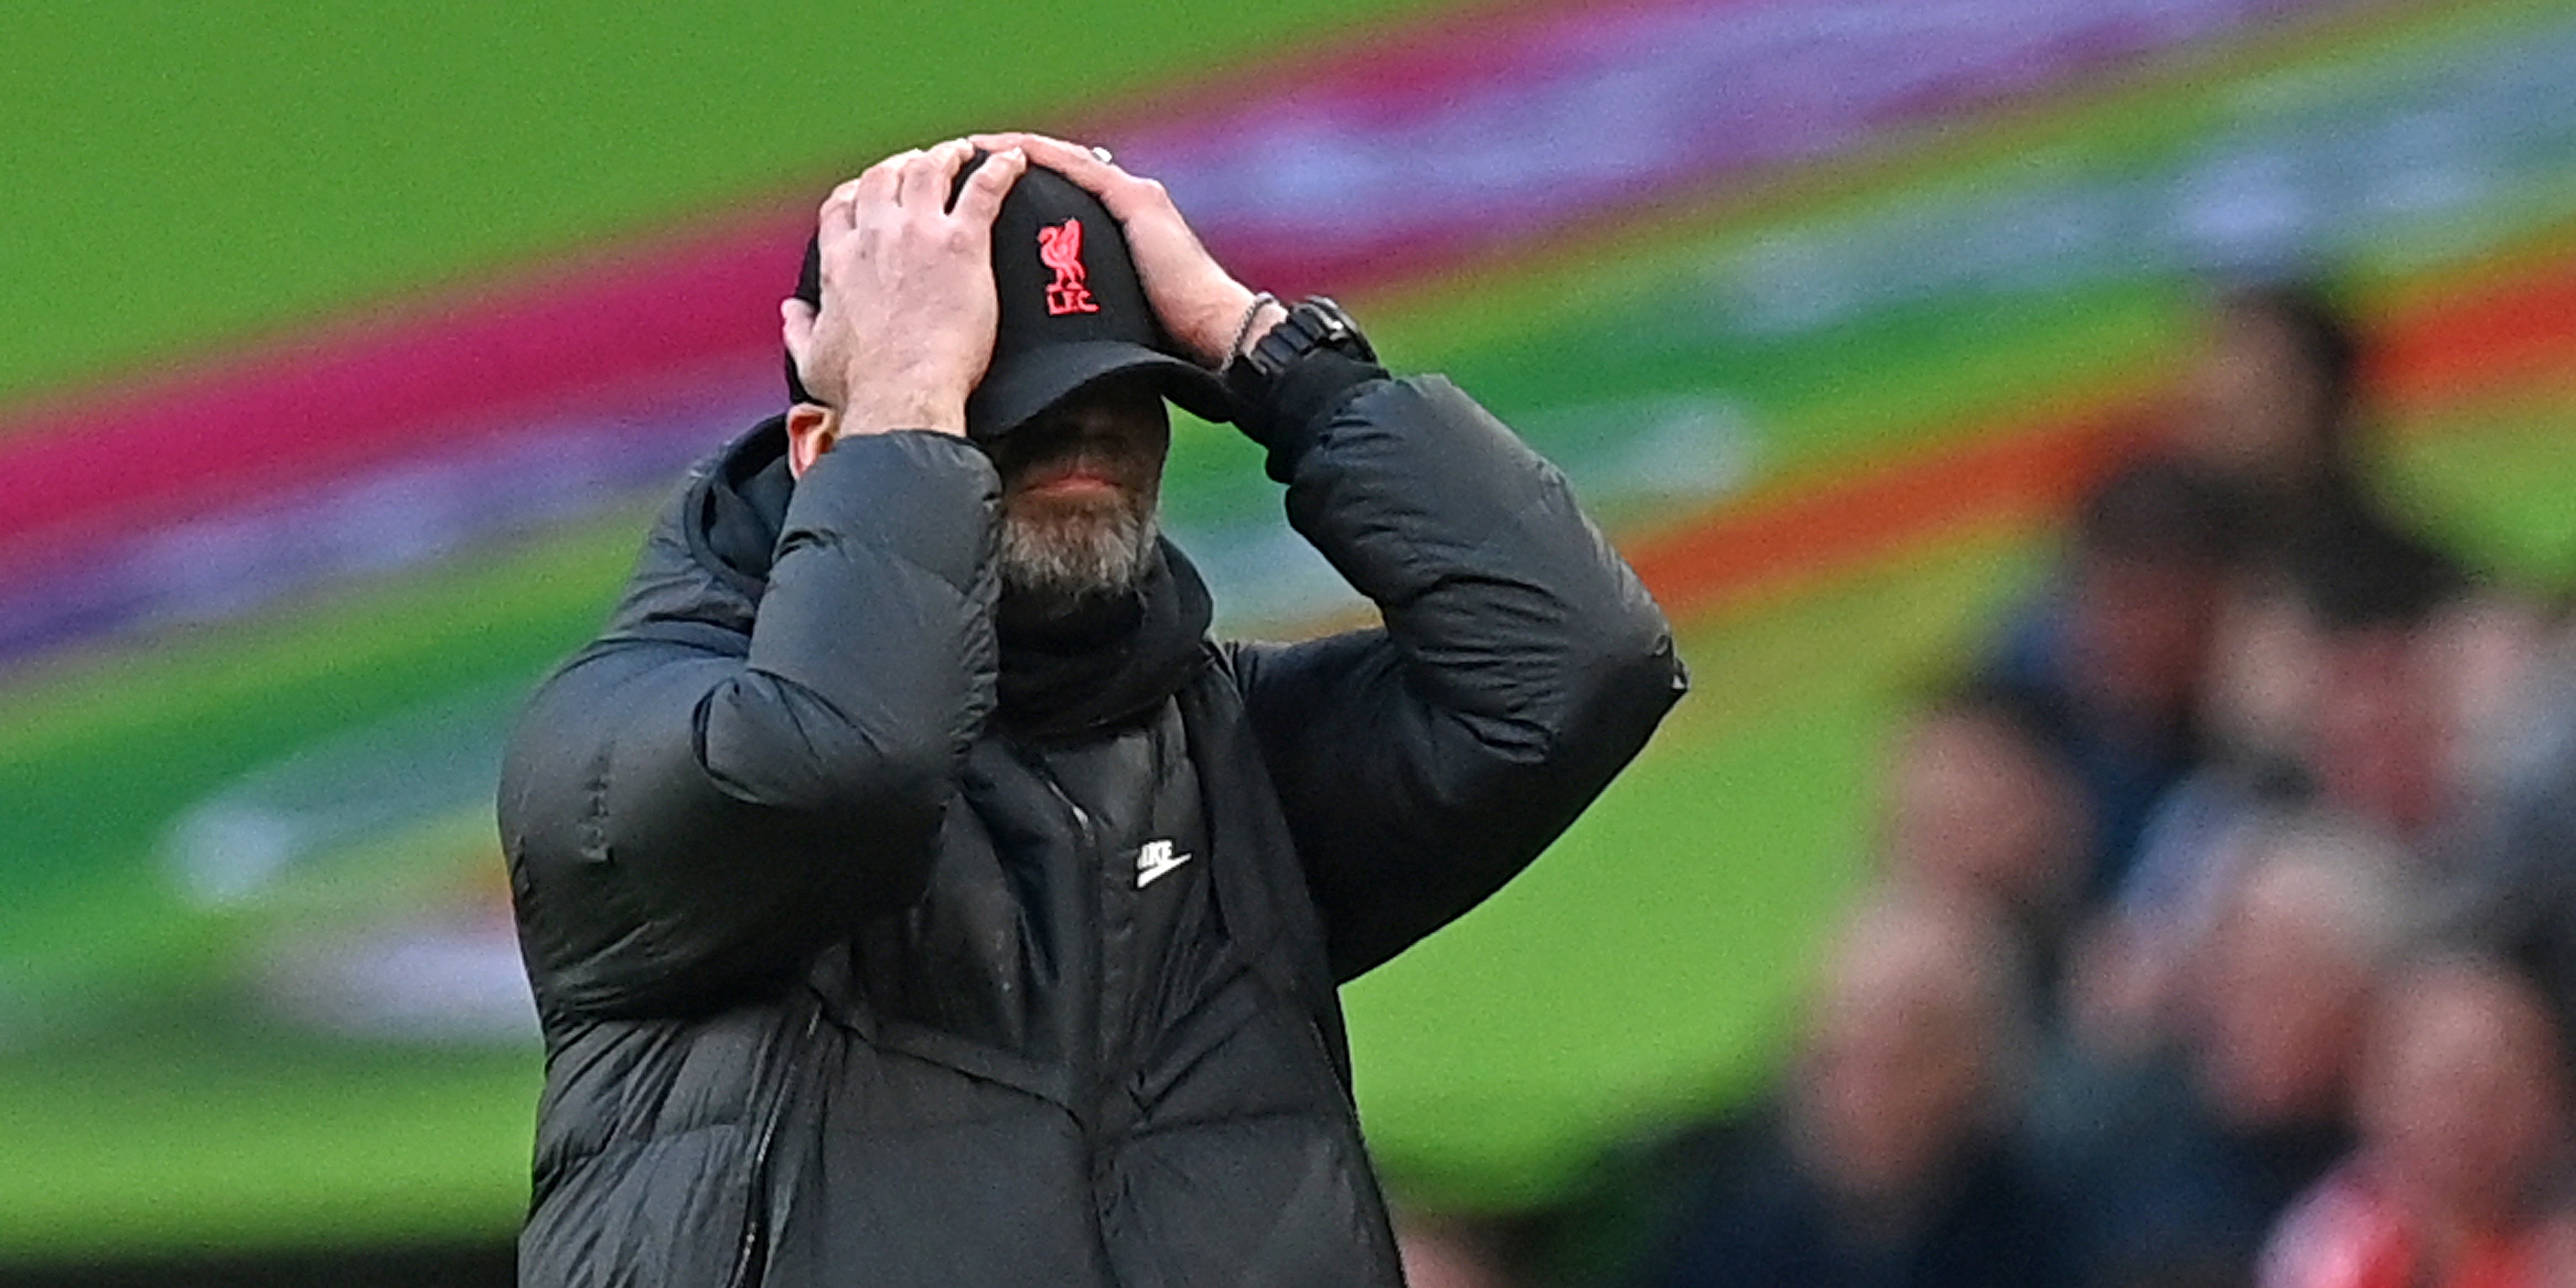 ‘He knew’ – Jamie Redknapp believes that Jurgen Klopp’s mood during last night’s post-match press conference suggests the German knows Liverpool’s chances of Premier League success are slim